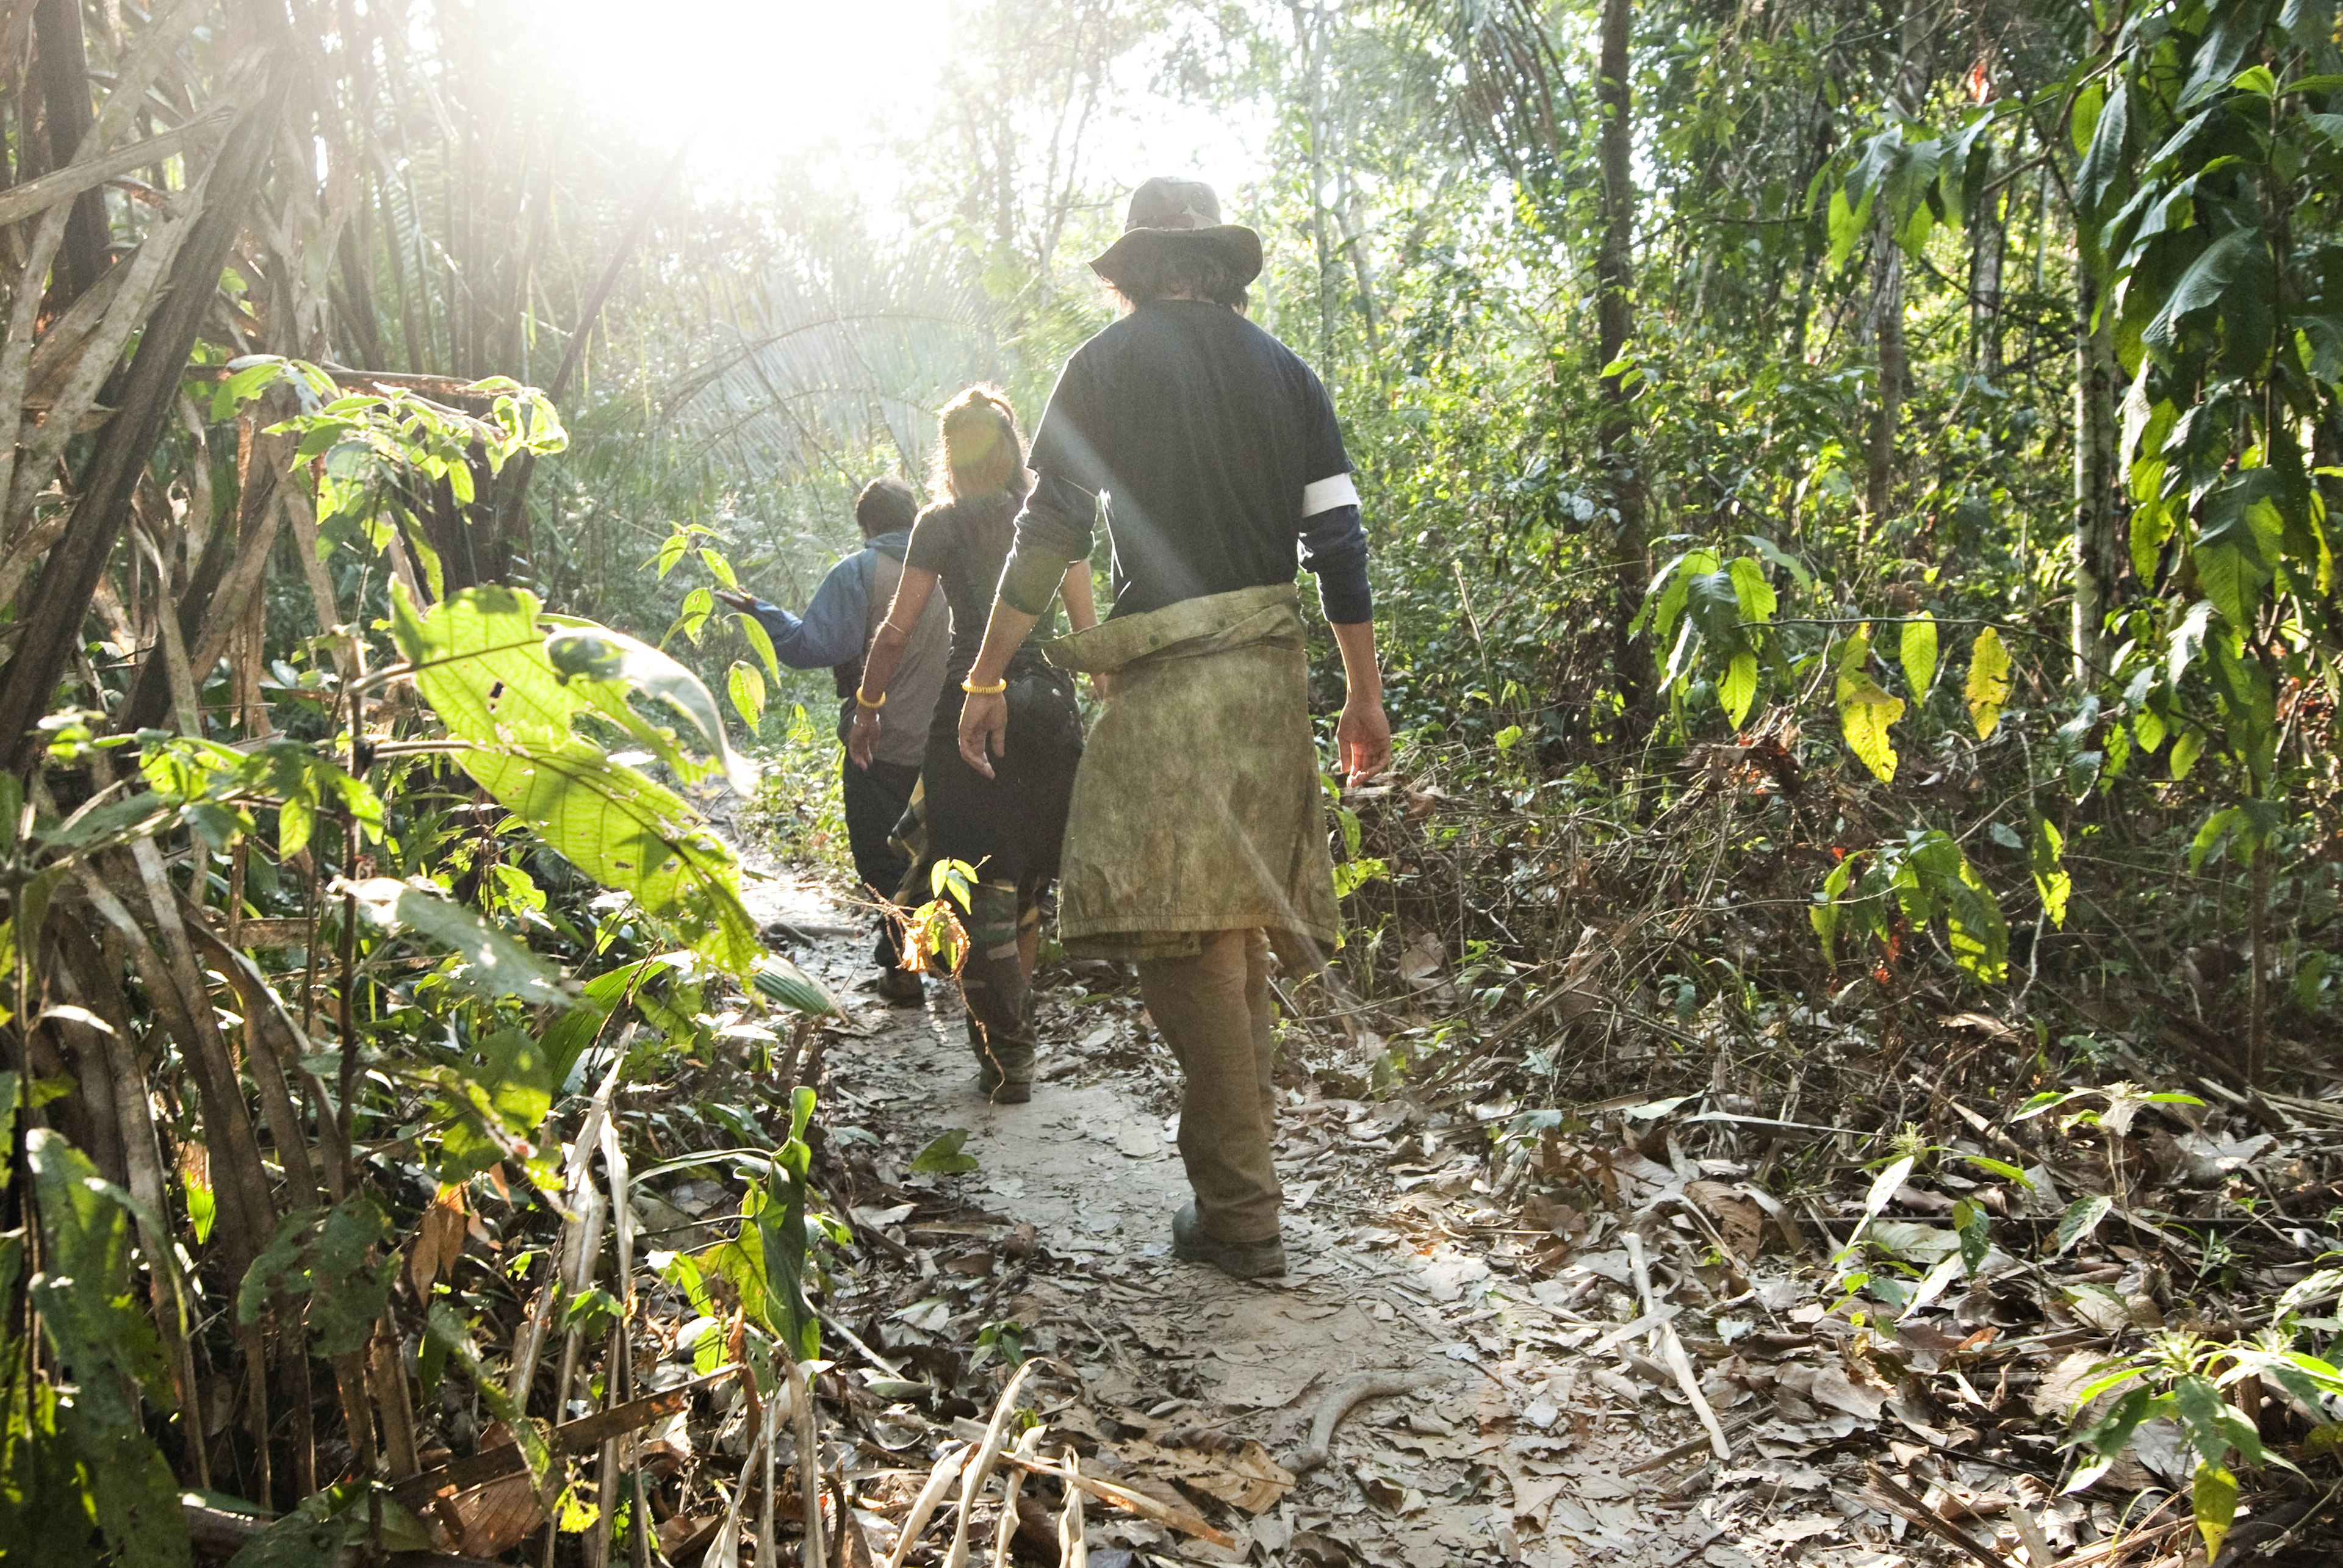 Three people walk through the amazon rainforest during the mid morning.